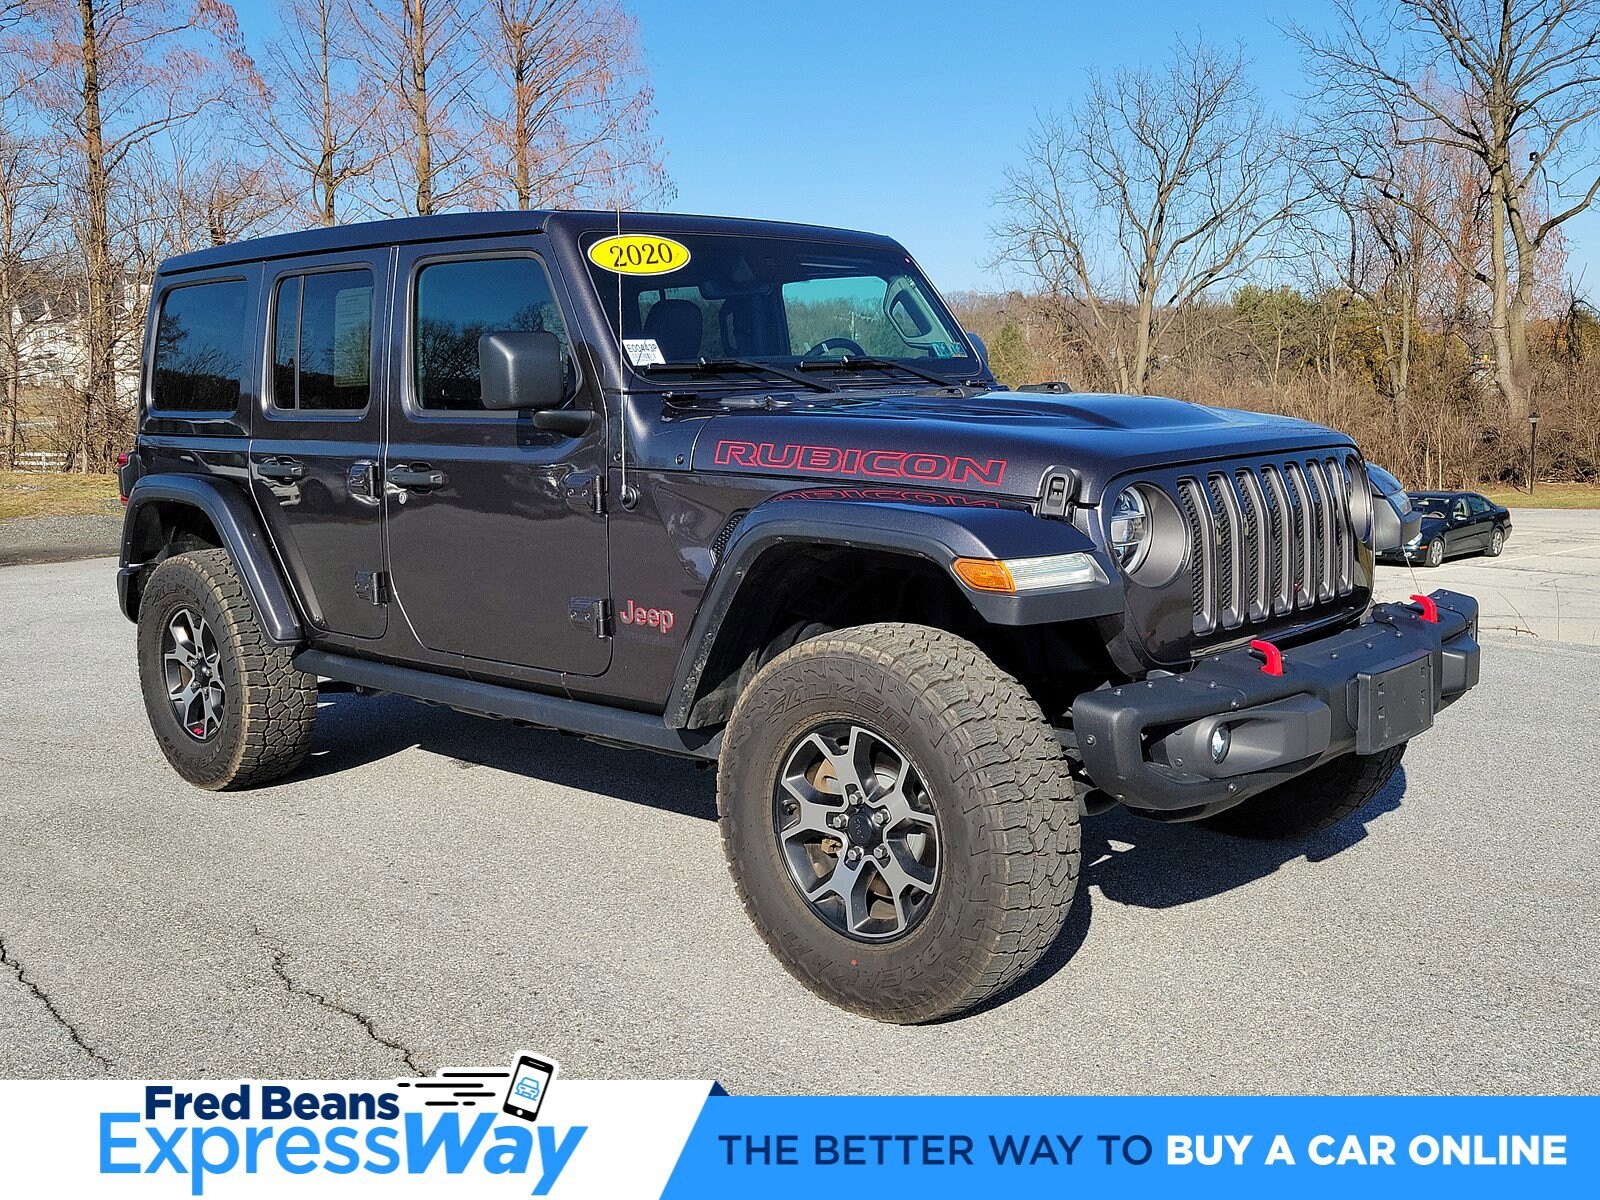 Used 2020 Jeep Wrangler Unlimited For Sale | Doylestown PA - Serving  Quakertown, Perkasie & Jamison PA | 1C4HJXFN0LW219635